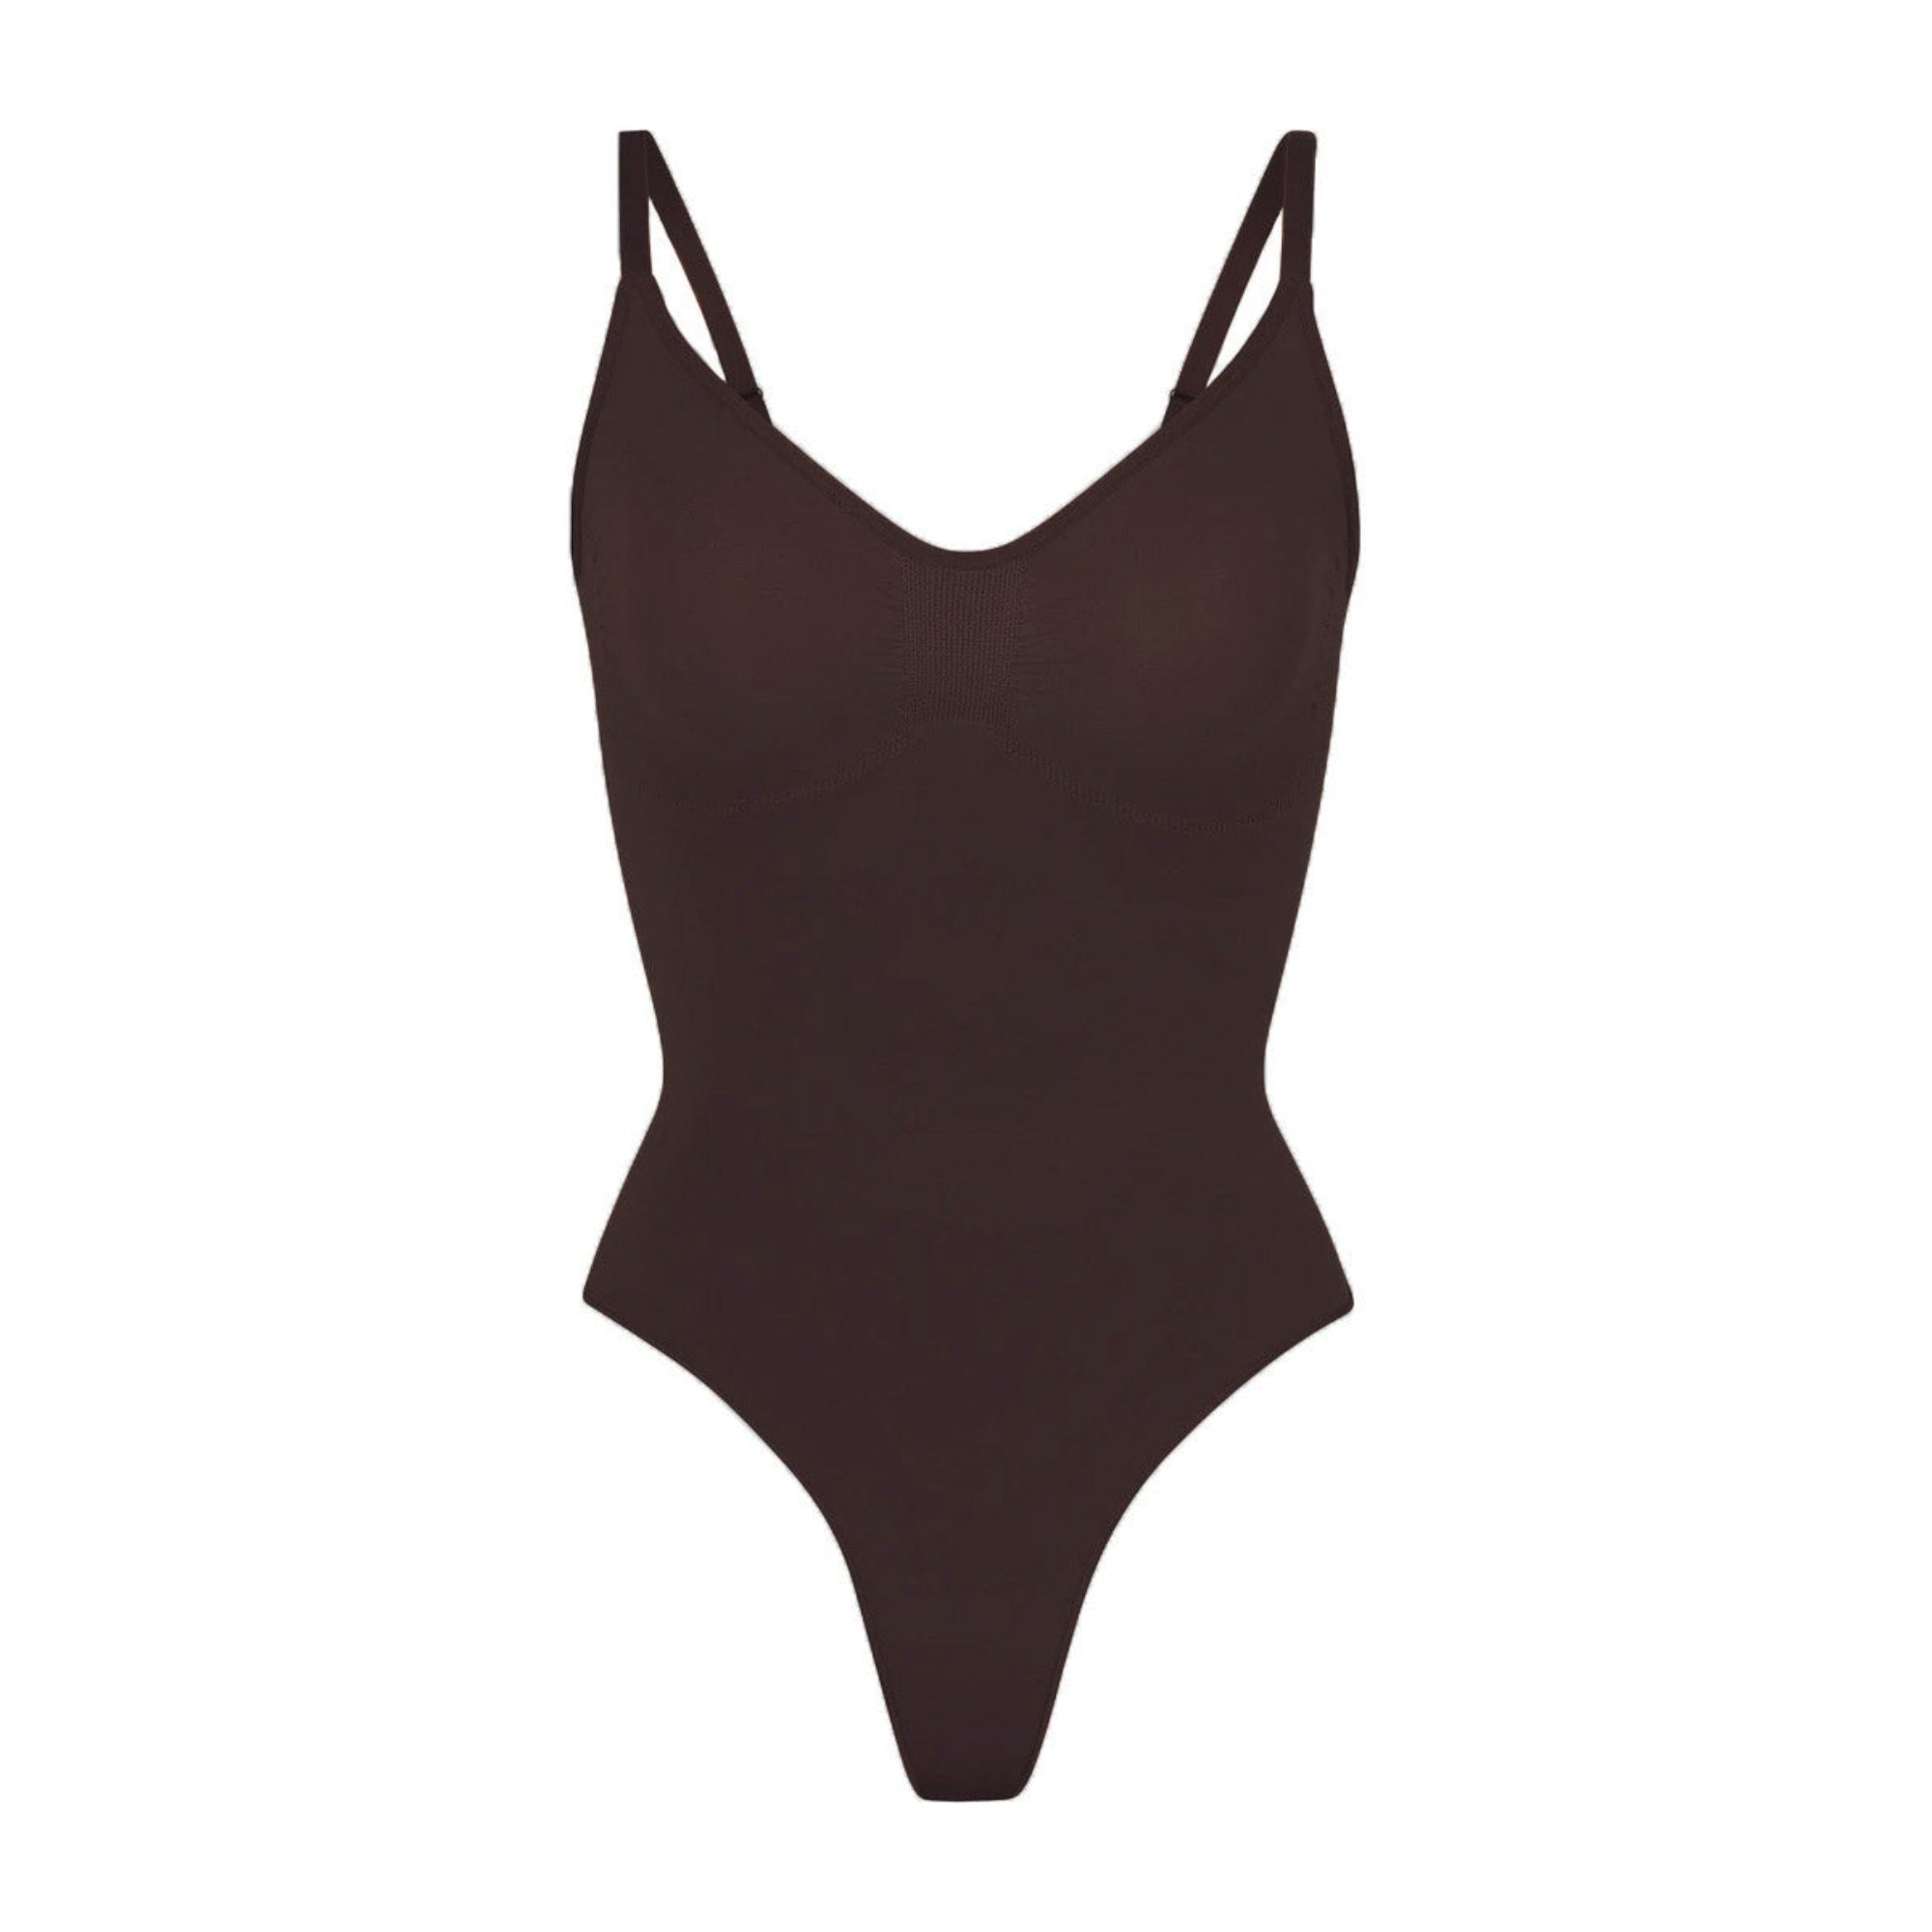 Track Seamless Sculpt Open Bust Thong Bodysuit - Espresso - XS at